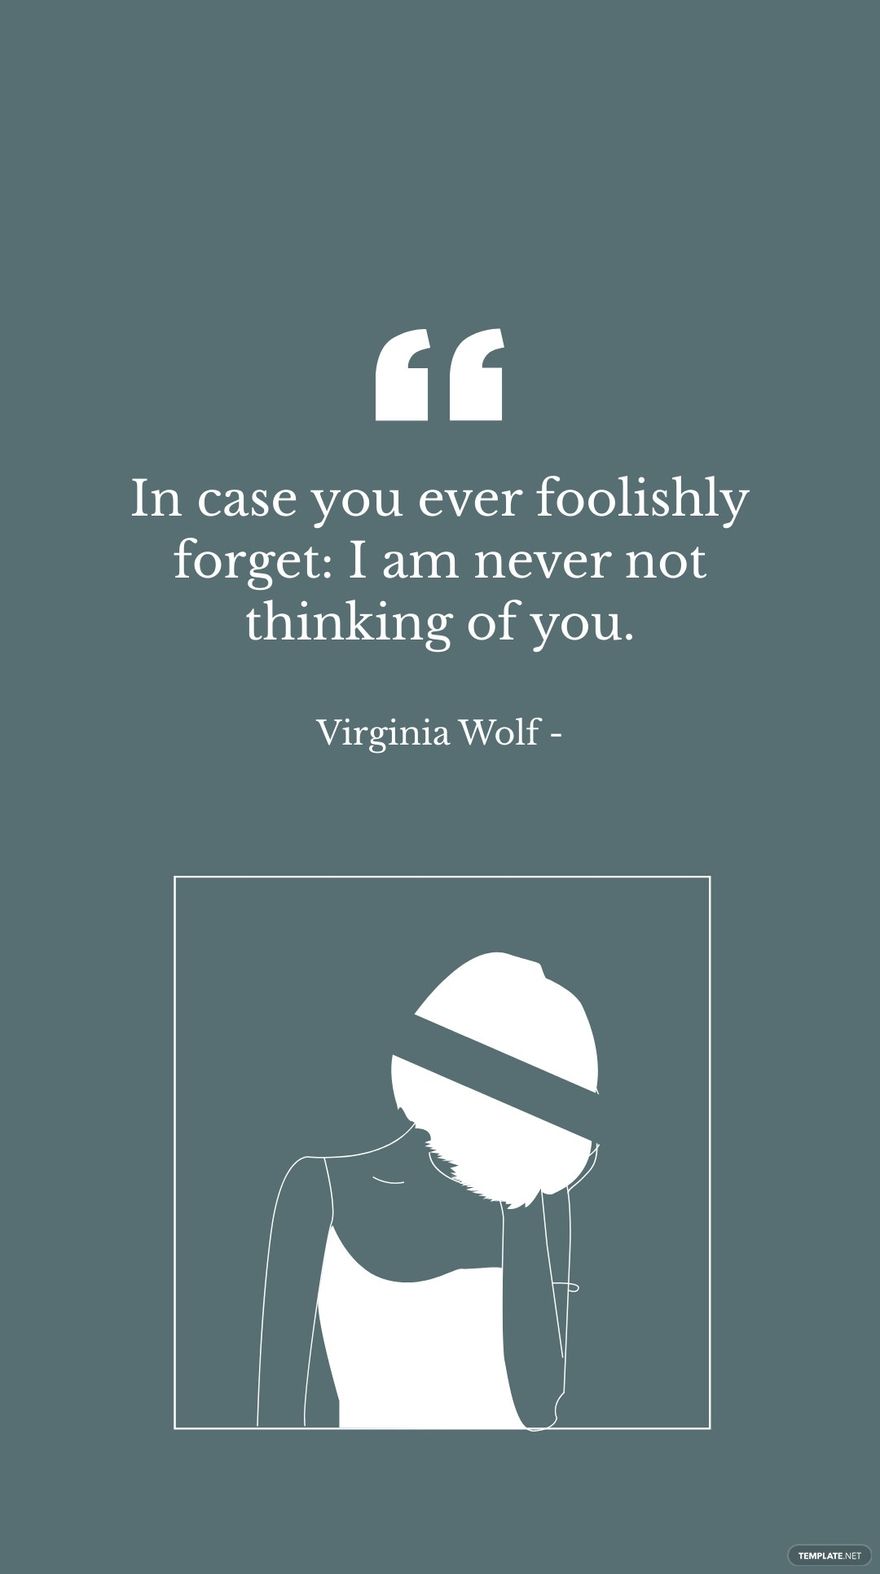 Virginia Wolf - In case you ever foolishly forget: I am never not thinking of you. in JPG